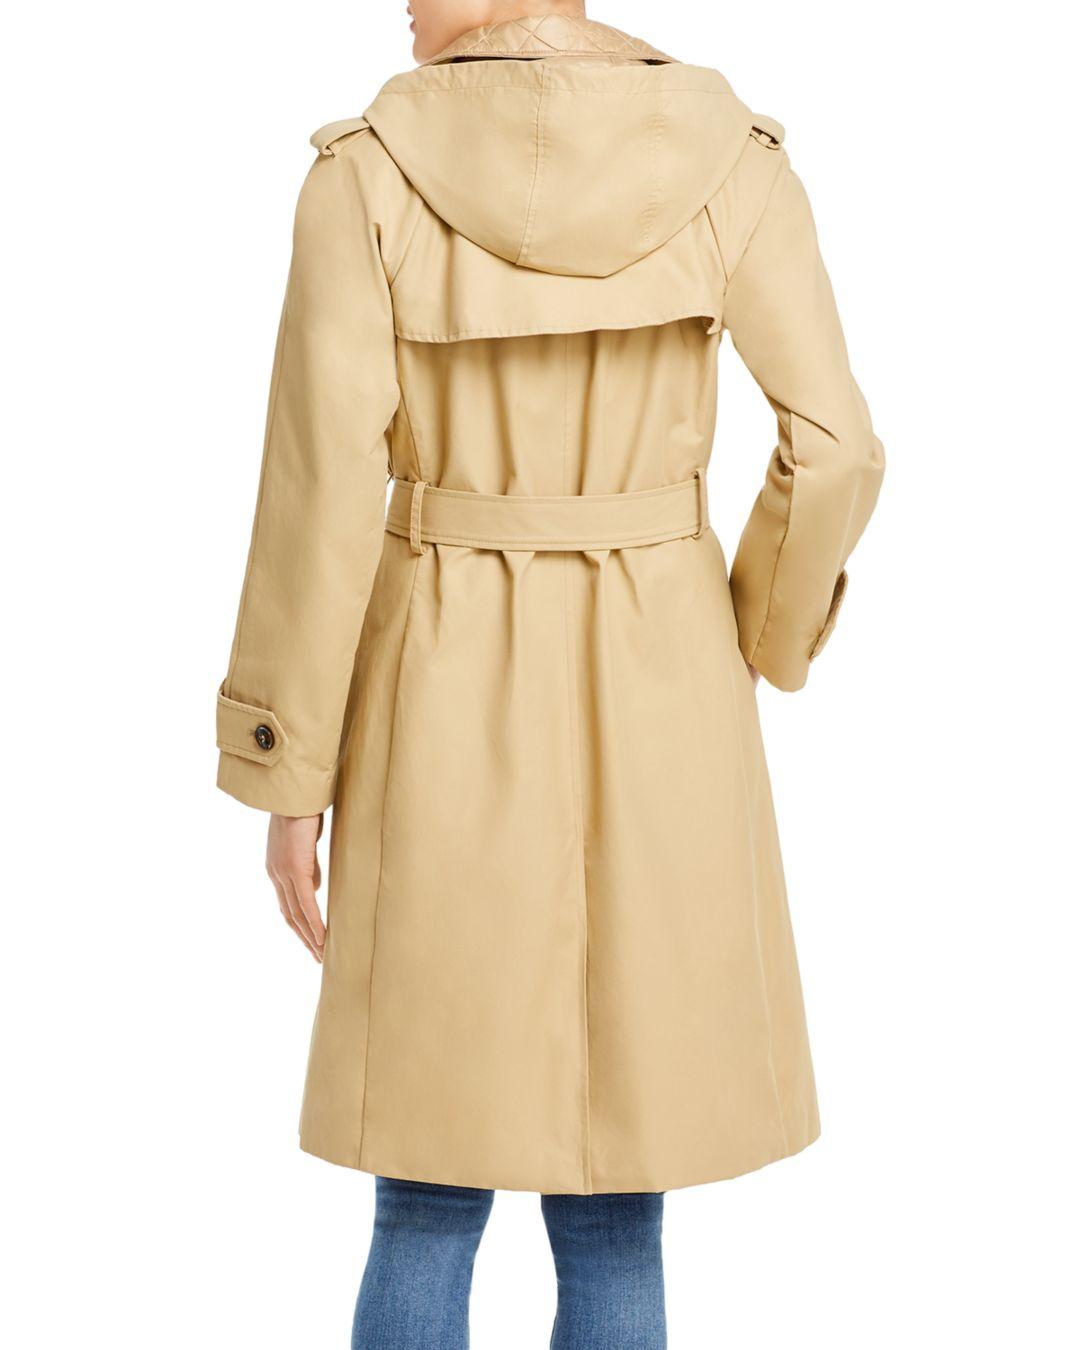 Kate Spade Cotton Quilted Trim Hooded Trench Coat in Khaki (Natural) - Lyst